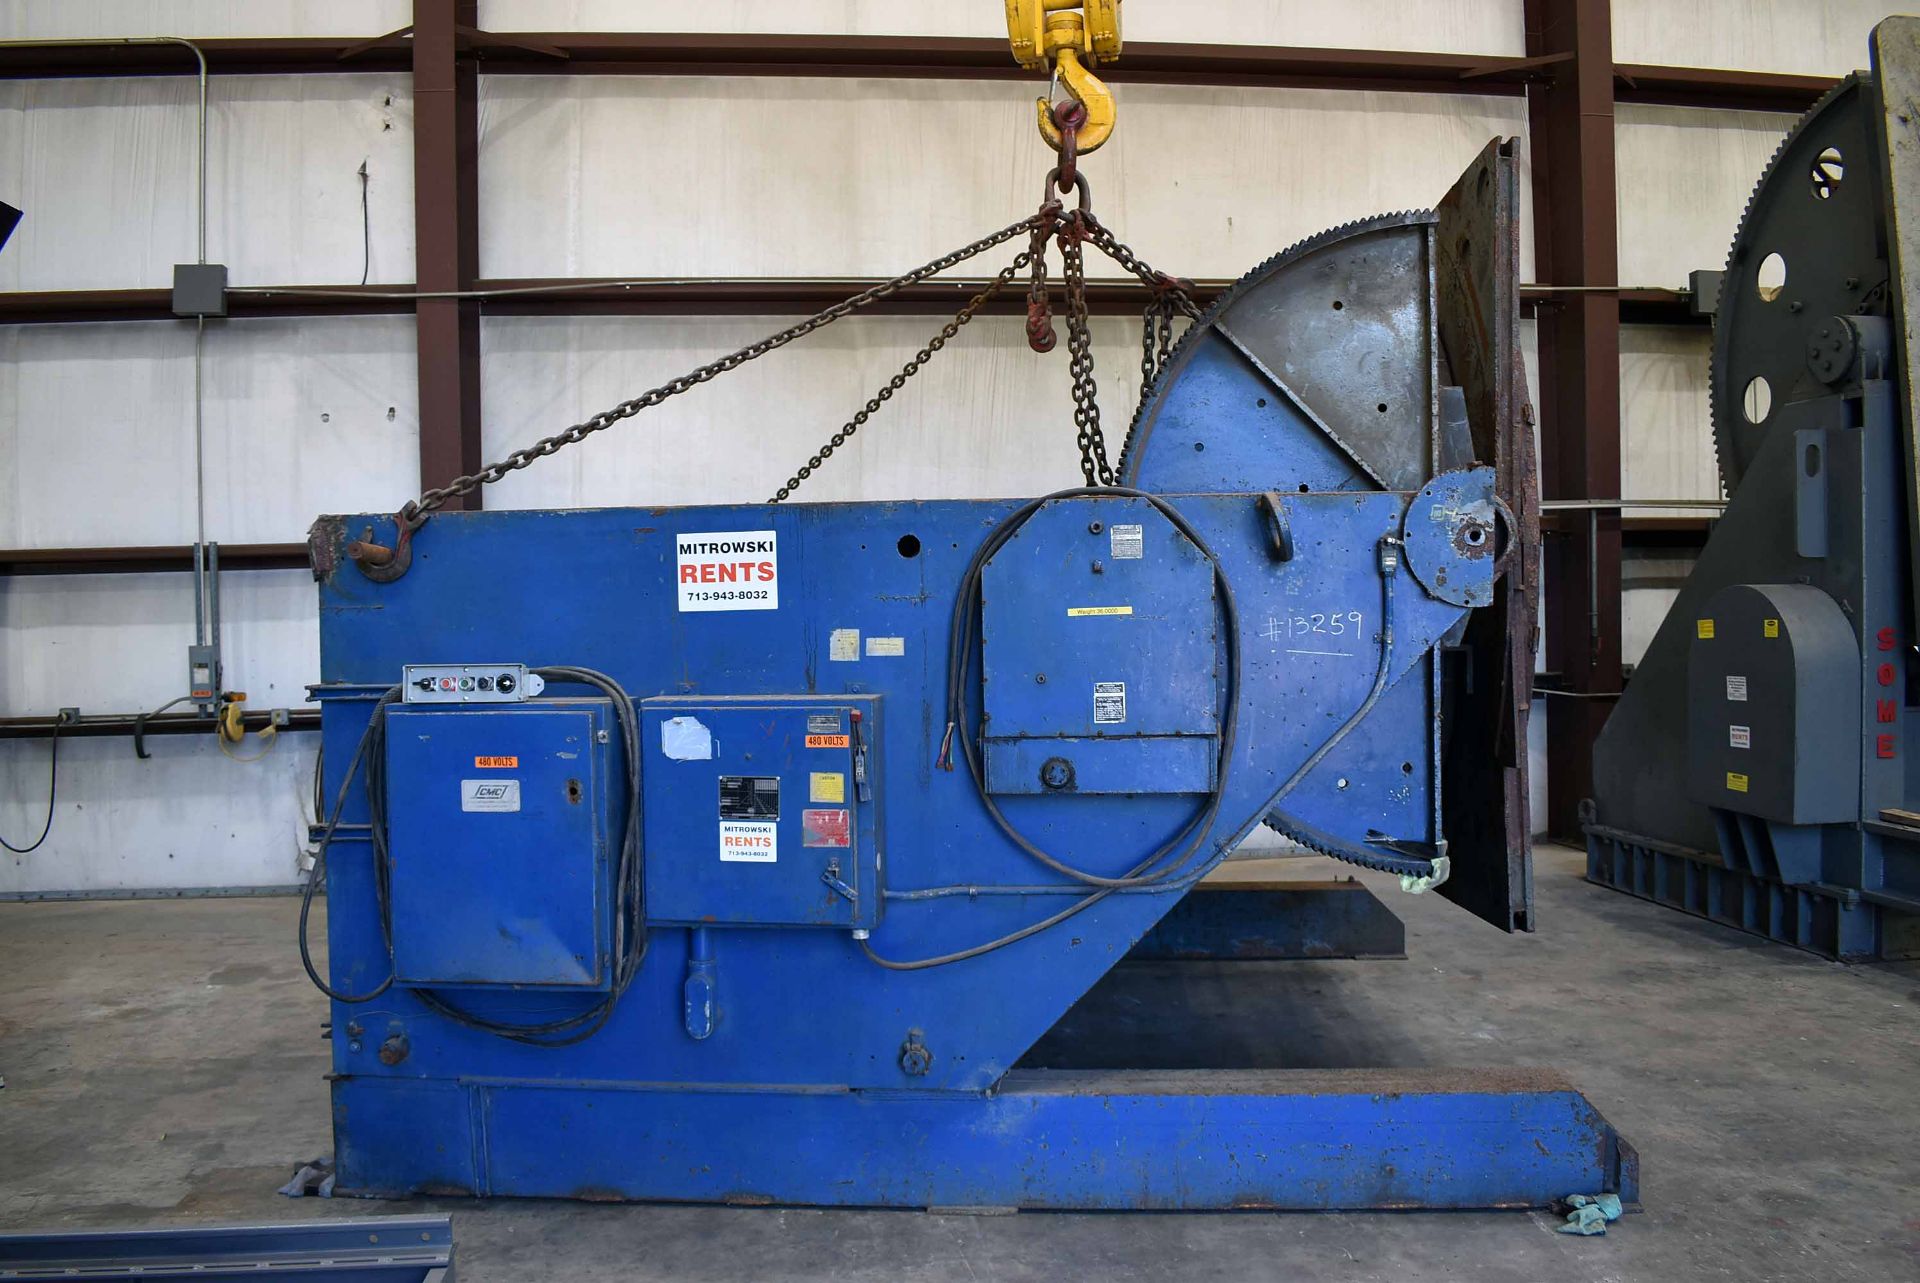 LARGE CAPACITY WELDING POSITIONER, KOIKE ARONSON 95,000 LB. CAP., Mdl. AB-950-96, 96" X 96" square - Image 3 of 11